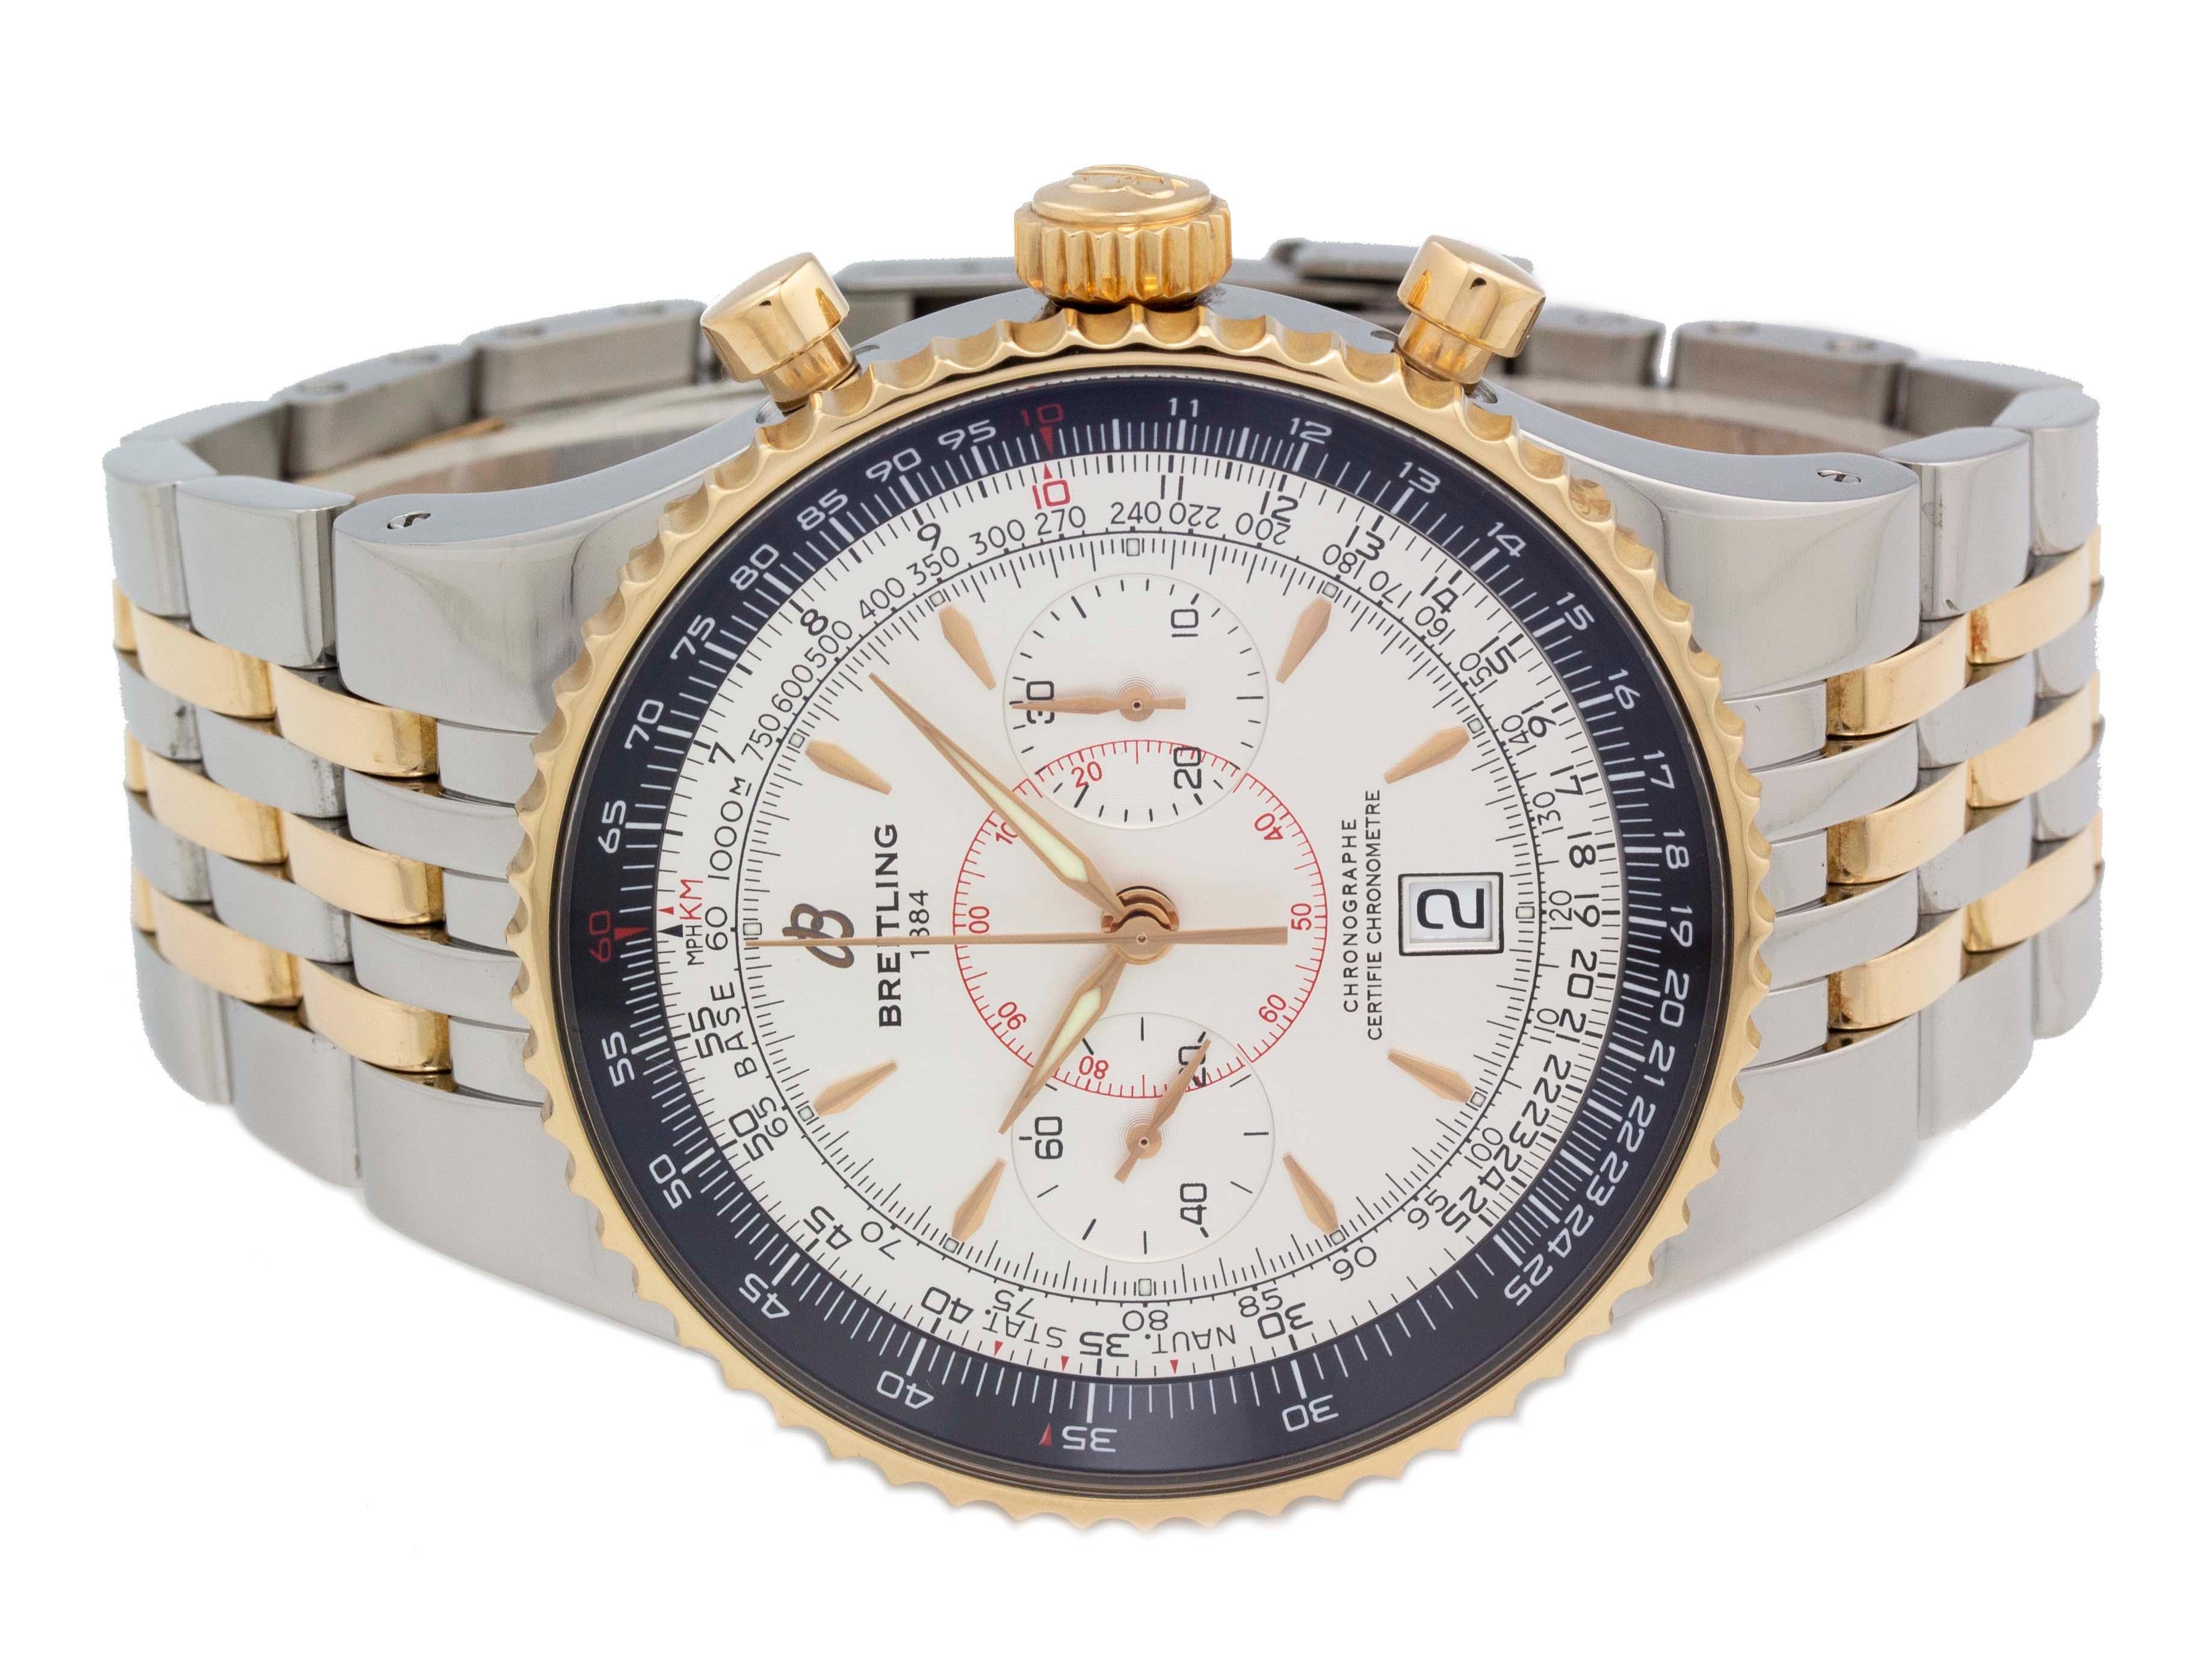 Brand	Breitling
Series	Montbrillant Legende
Model	C2334024/G637
Gender	Men's
Condition	Excellent Display Model
Material	Stainless Steel
Finish	Polished
Caseback	Solid
Diameter	47mm
Thickness	15mm
Bezel	18k Yellow Gold
Crystal	Sapphire Scratch